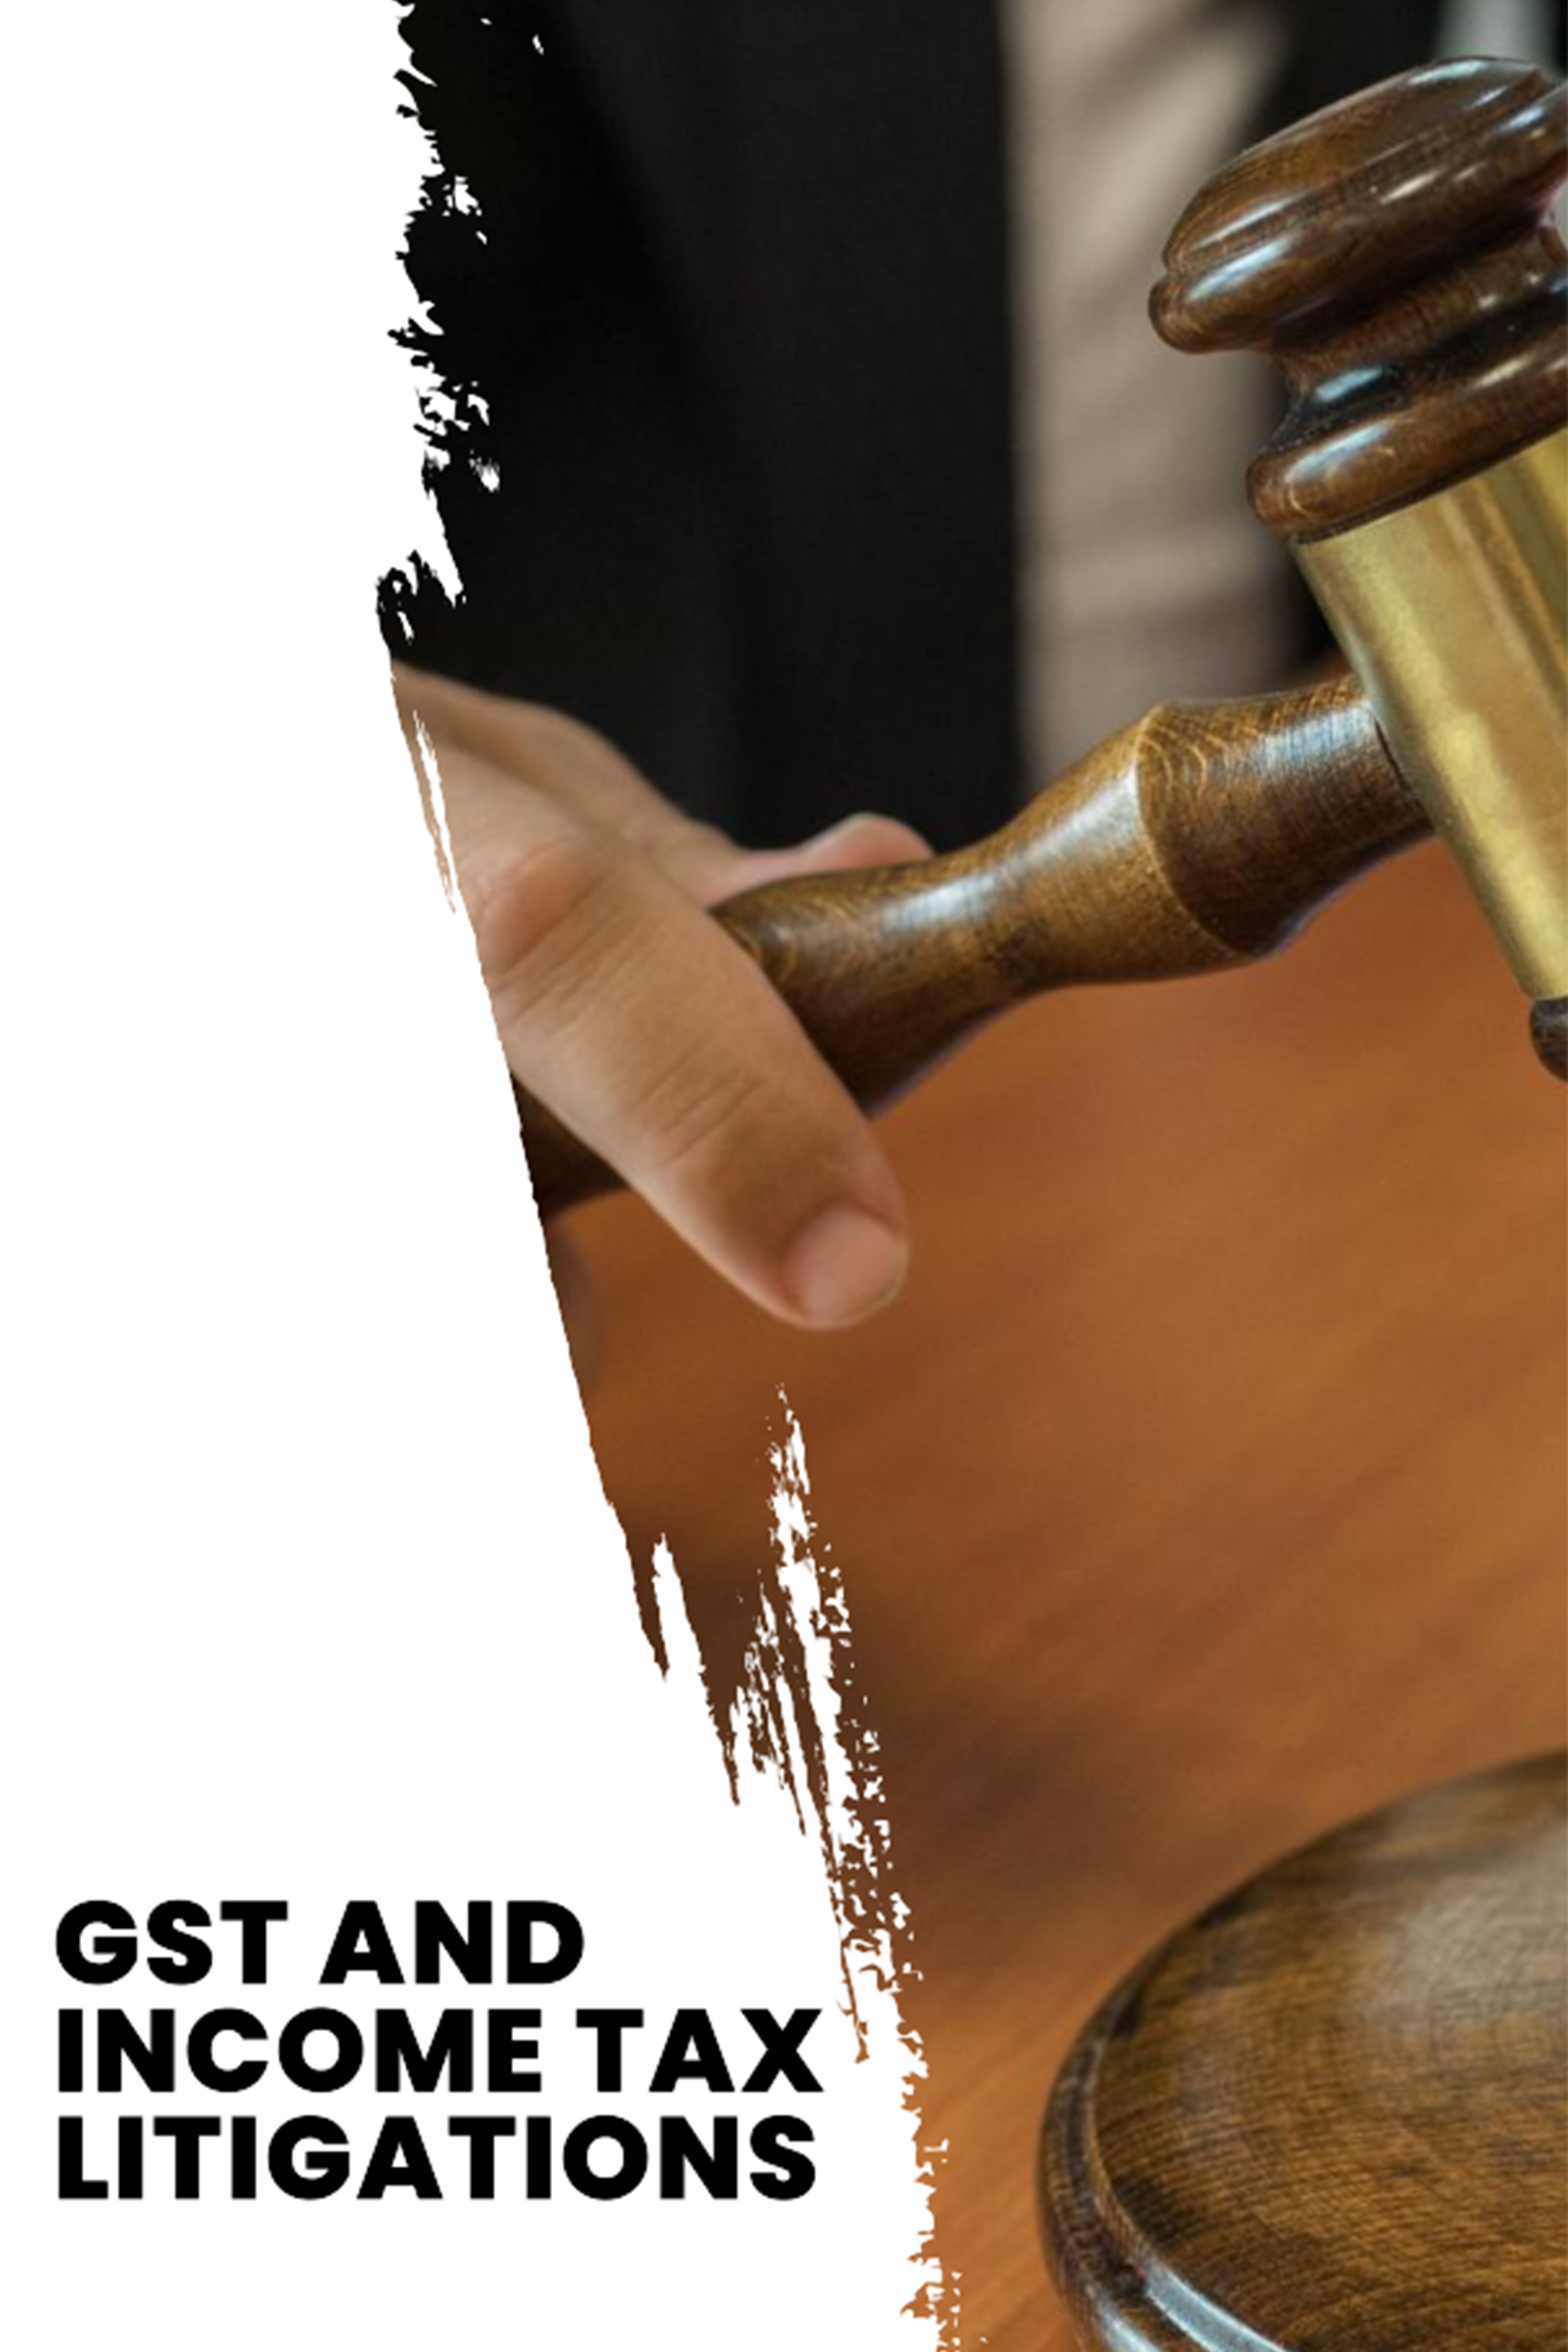 GST and Income Tax Work with Litigation issues Handling